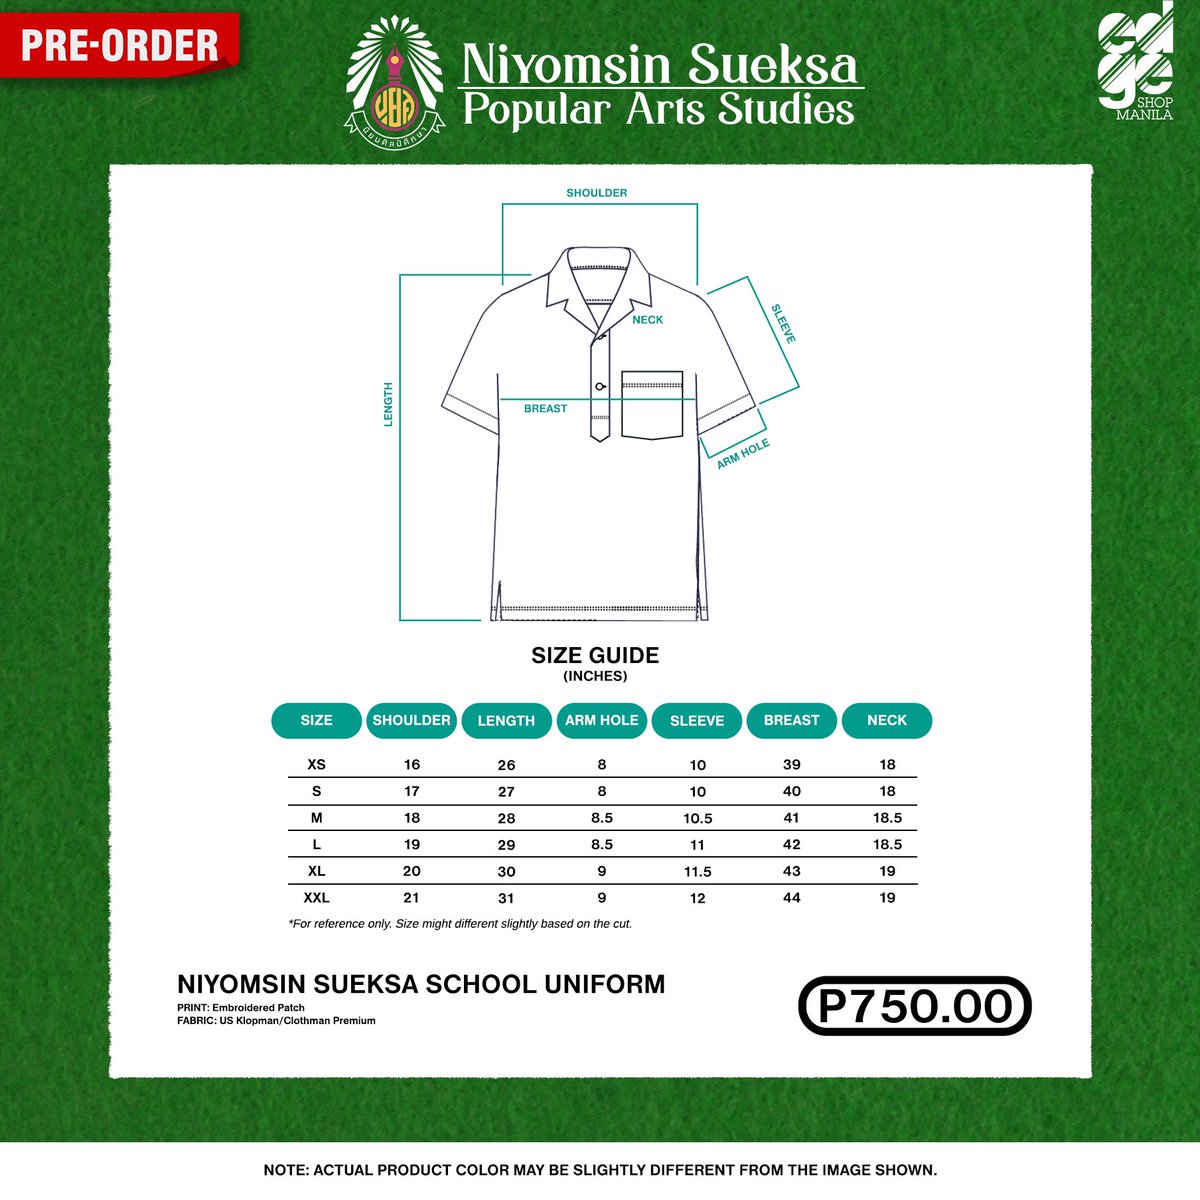 Hello Classmates!

Elevate your fanmeet experience with this Niyomsin Sueksa School Uniform to match your #OOTD!

We’re NOW accepting PRE-ORDERS until July 10, 11:59pm! Please read the guidelines carefully before filling out the form here: bit.ly/G4ALT

#MSPFMinMNL